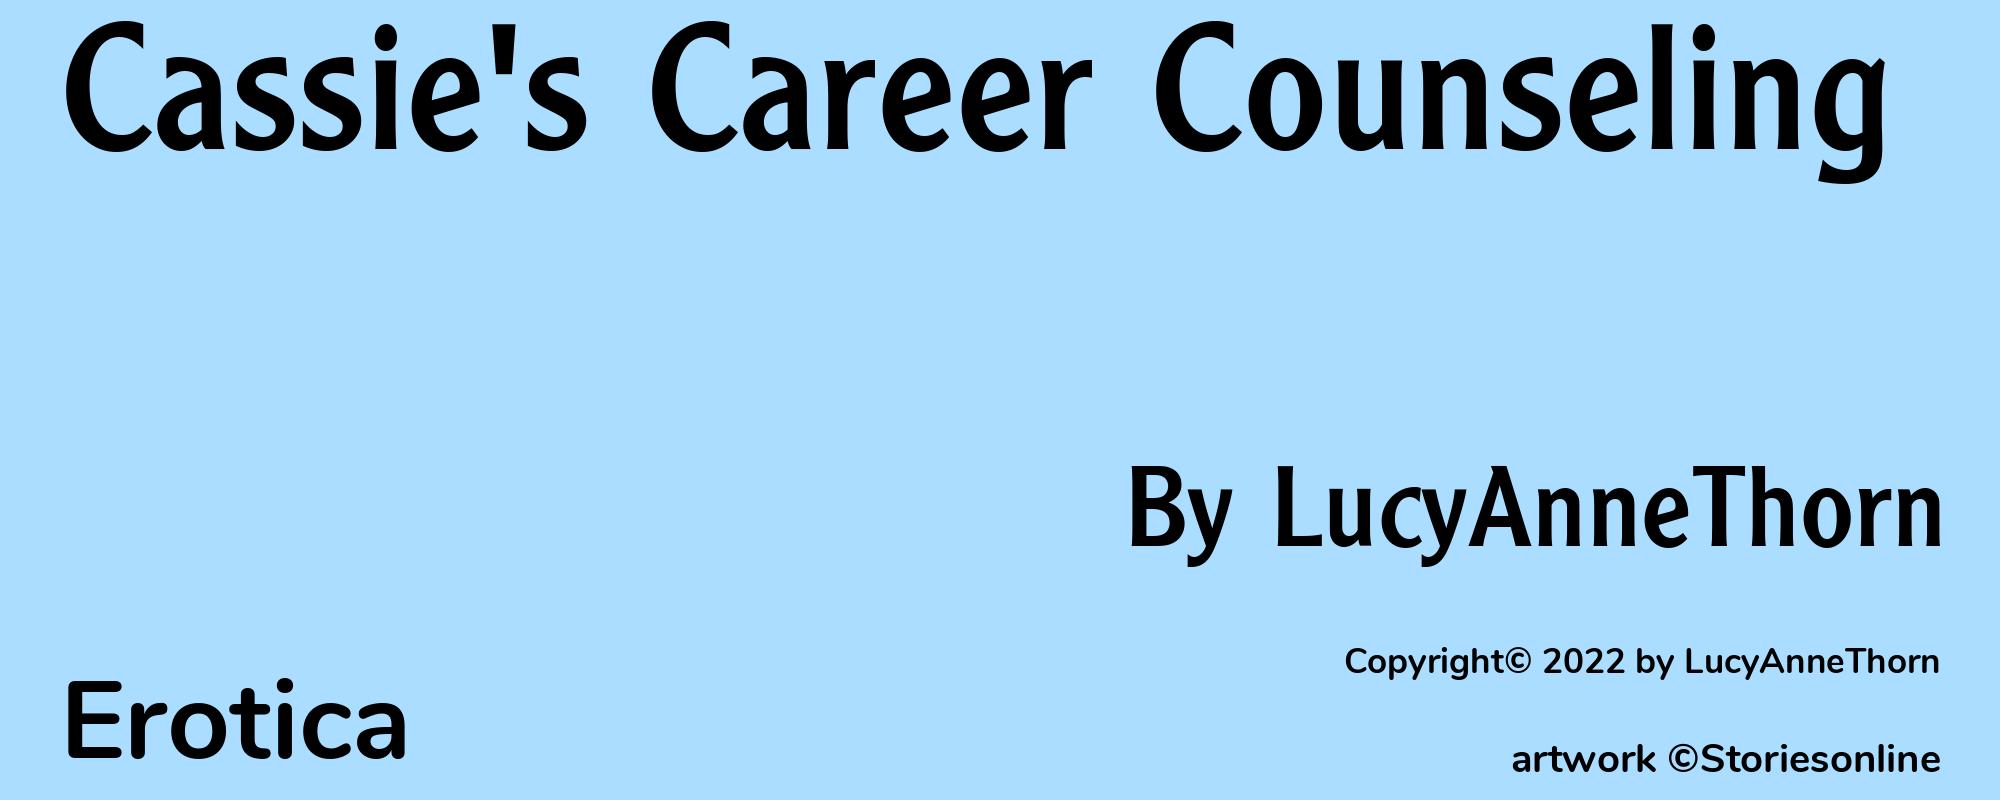 Cassie's Career Counseling - Cover